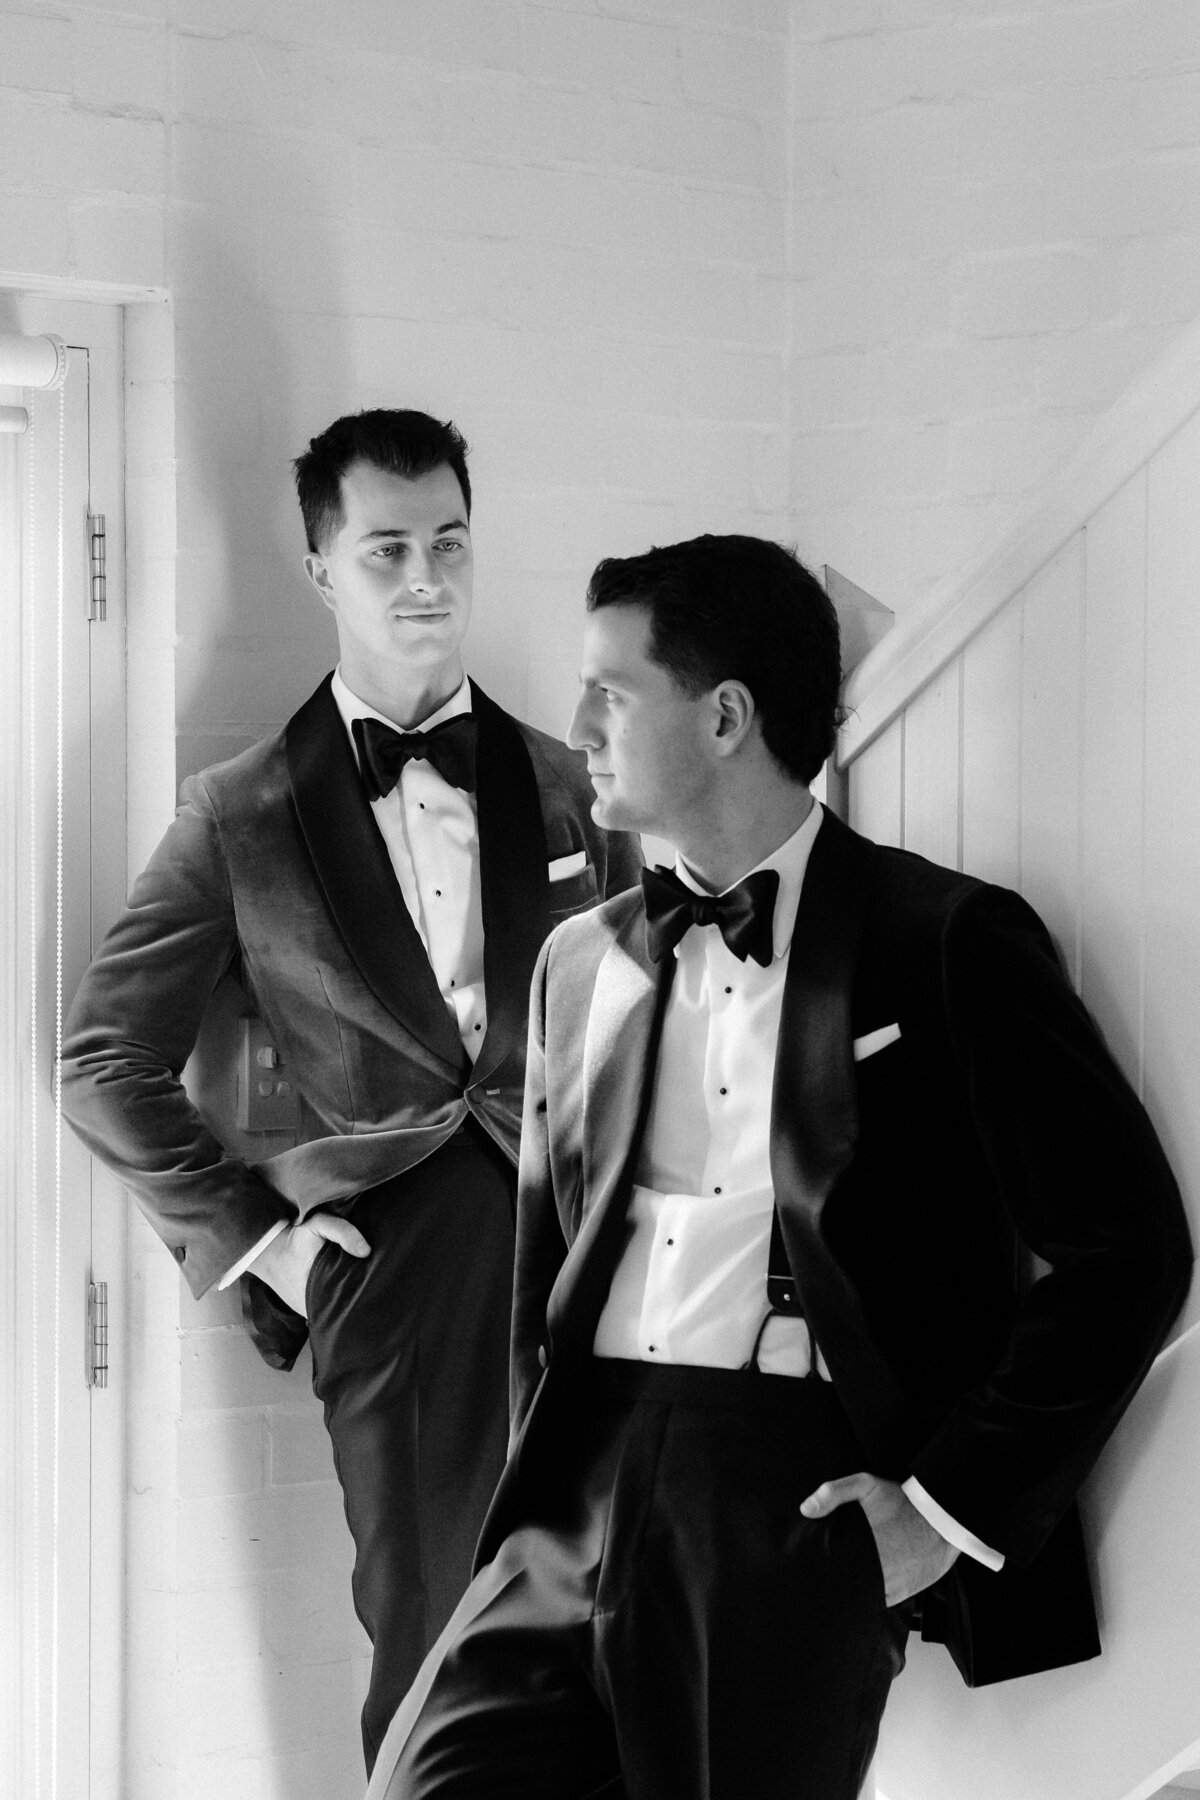 Black and white image of two grooms posing at the bottom of a staircase.